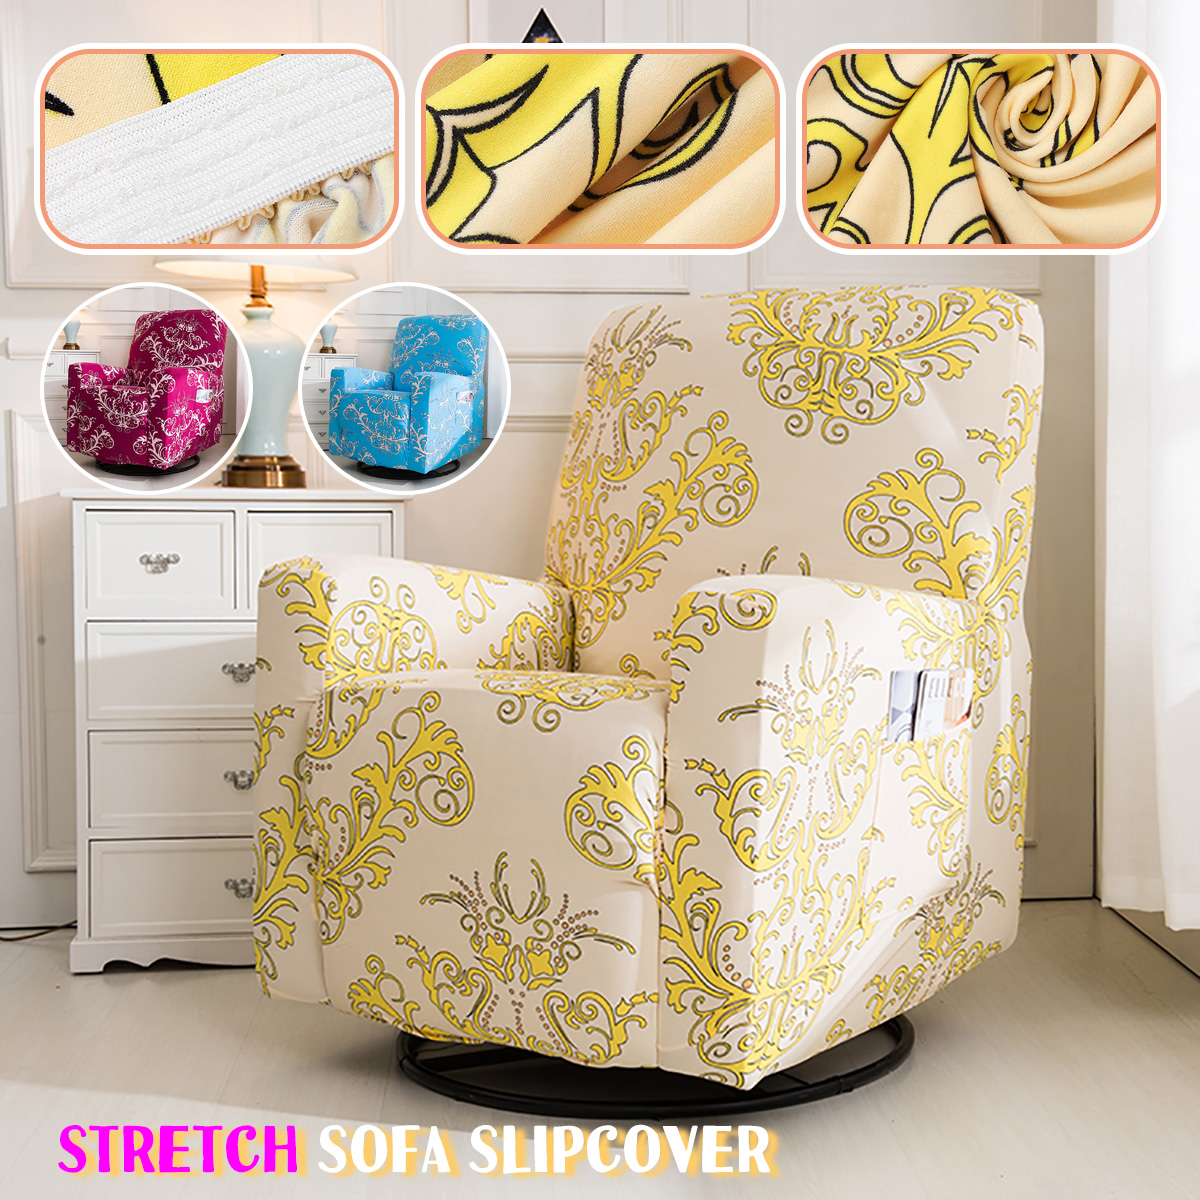 Home-Living-Elastic-Single-Seat-Chair-Covers-Slip-resistant-Spandex-Stretch-Stretchable-Sofa-Covers--1924764-1